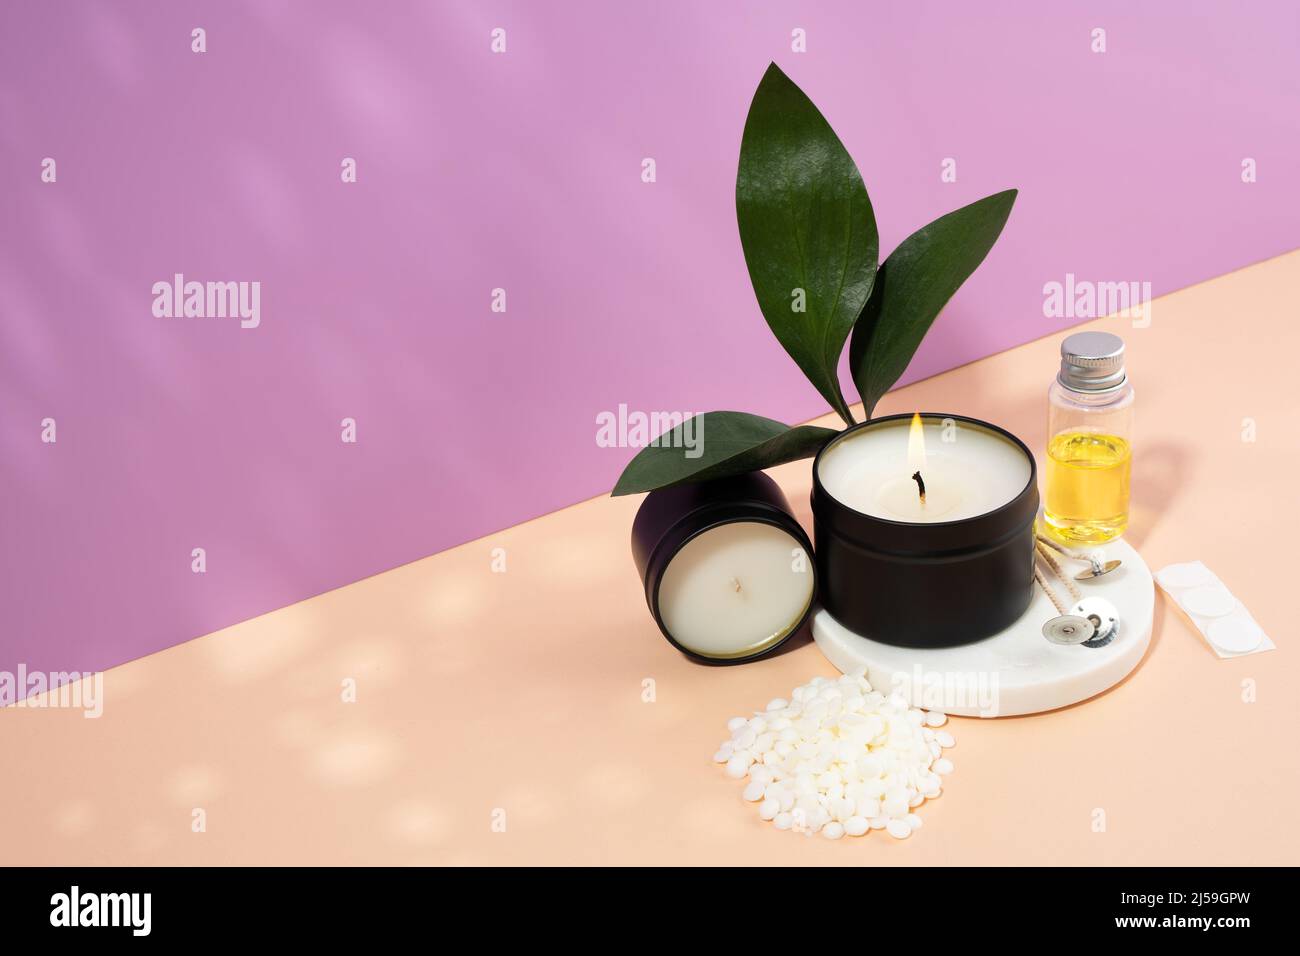 Wooden Wick Candles Handmade Candle From Paraffin And Soy Wax In Glass With  Flowers And Leaf On Craft Background Let Flay Candle Making Top View Stock  Photo - Download Image Now - iStock